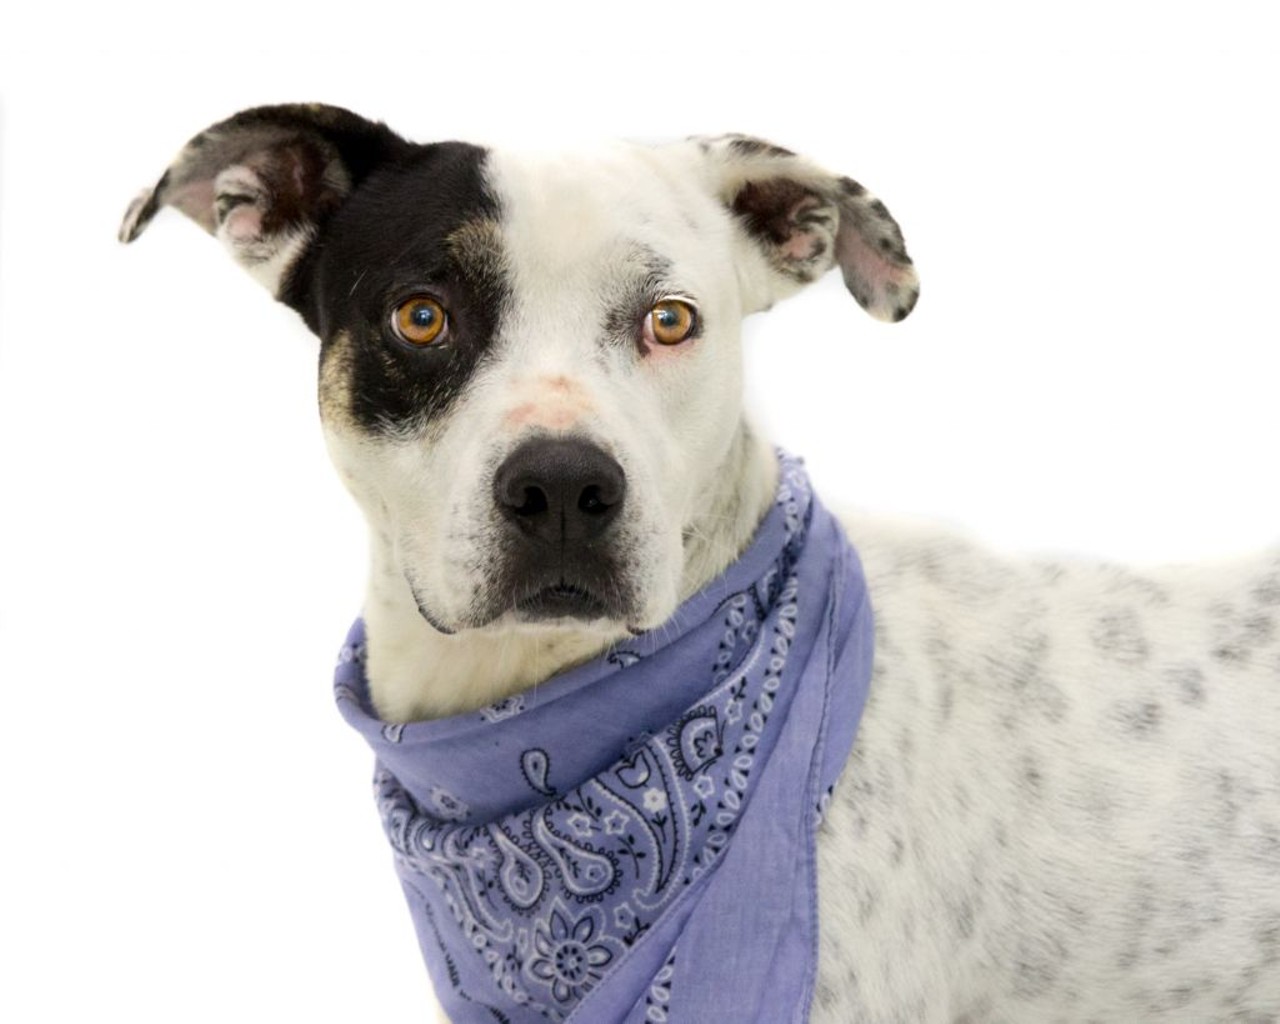 16 adoptable pooches ready to meet you at Orange County Animal Services